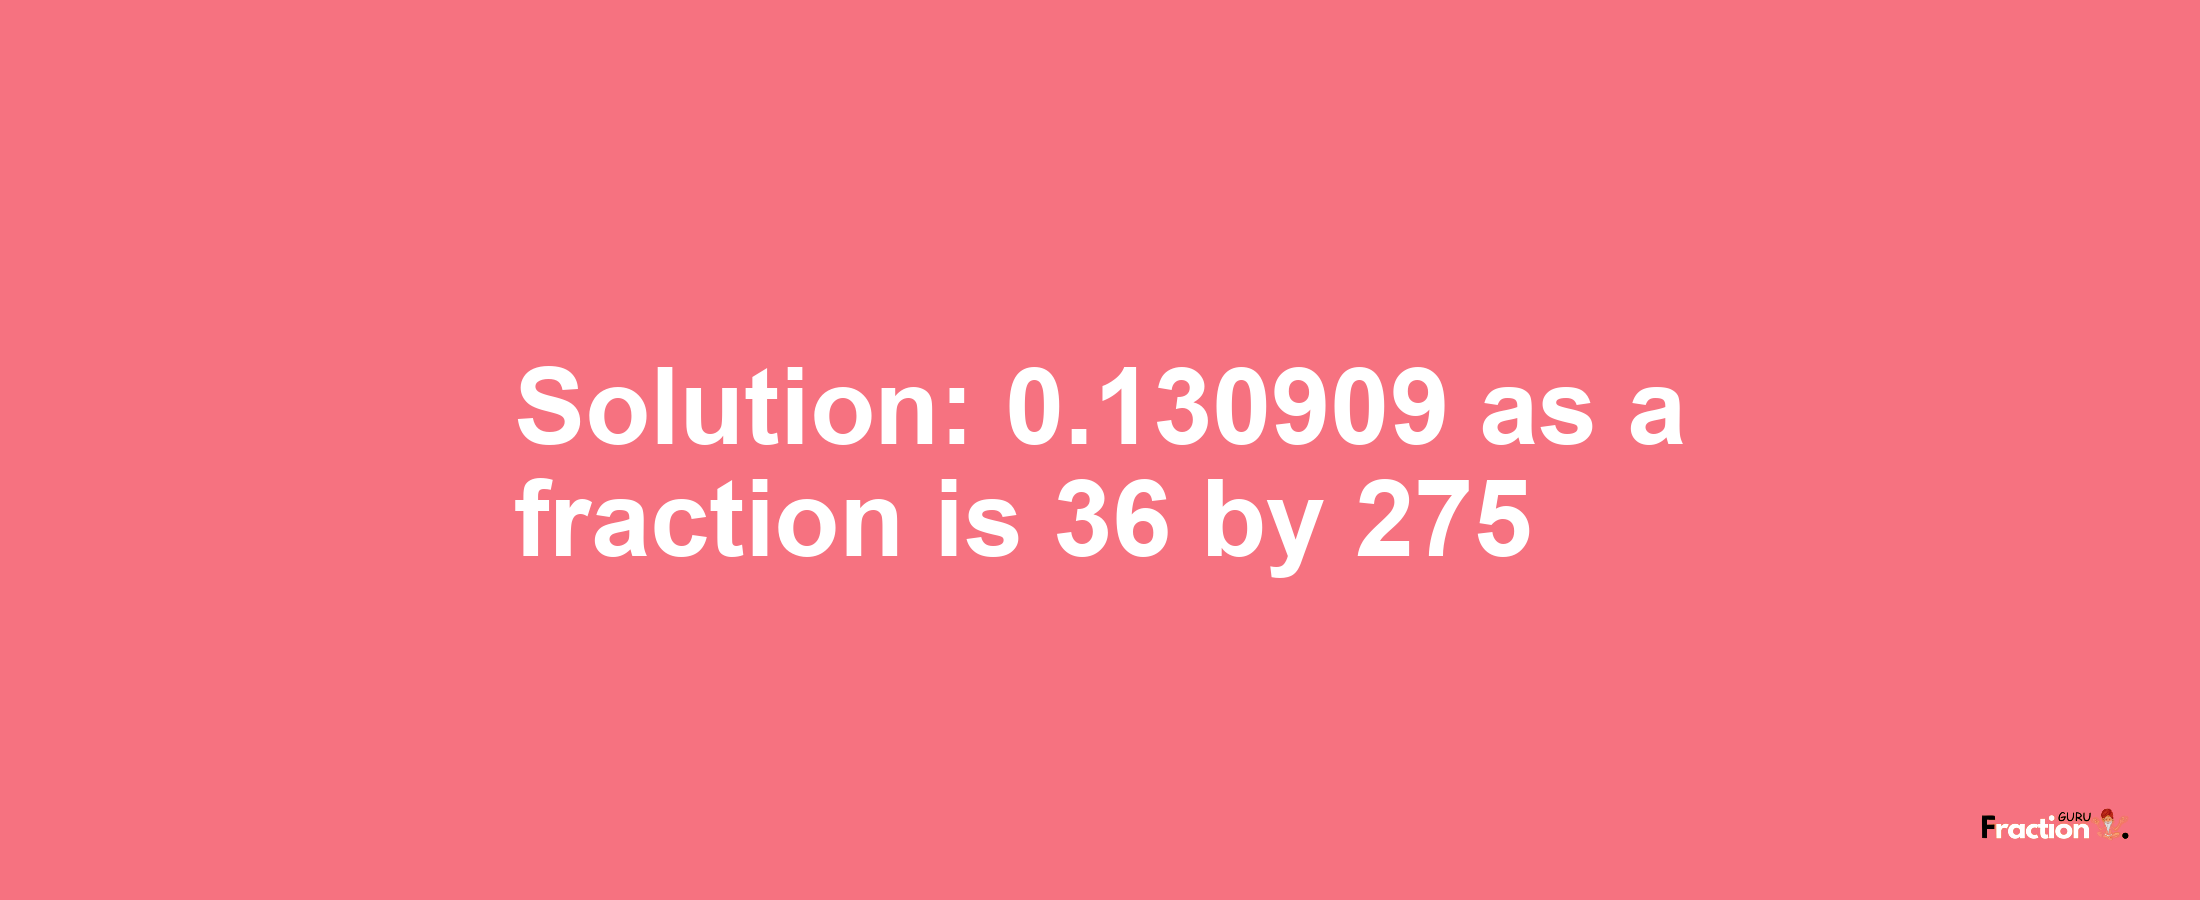 Solution:0.130909 as a fraction is 36/275